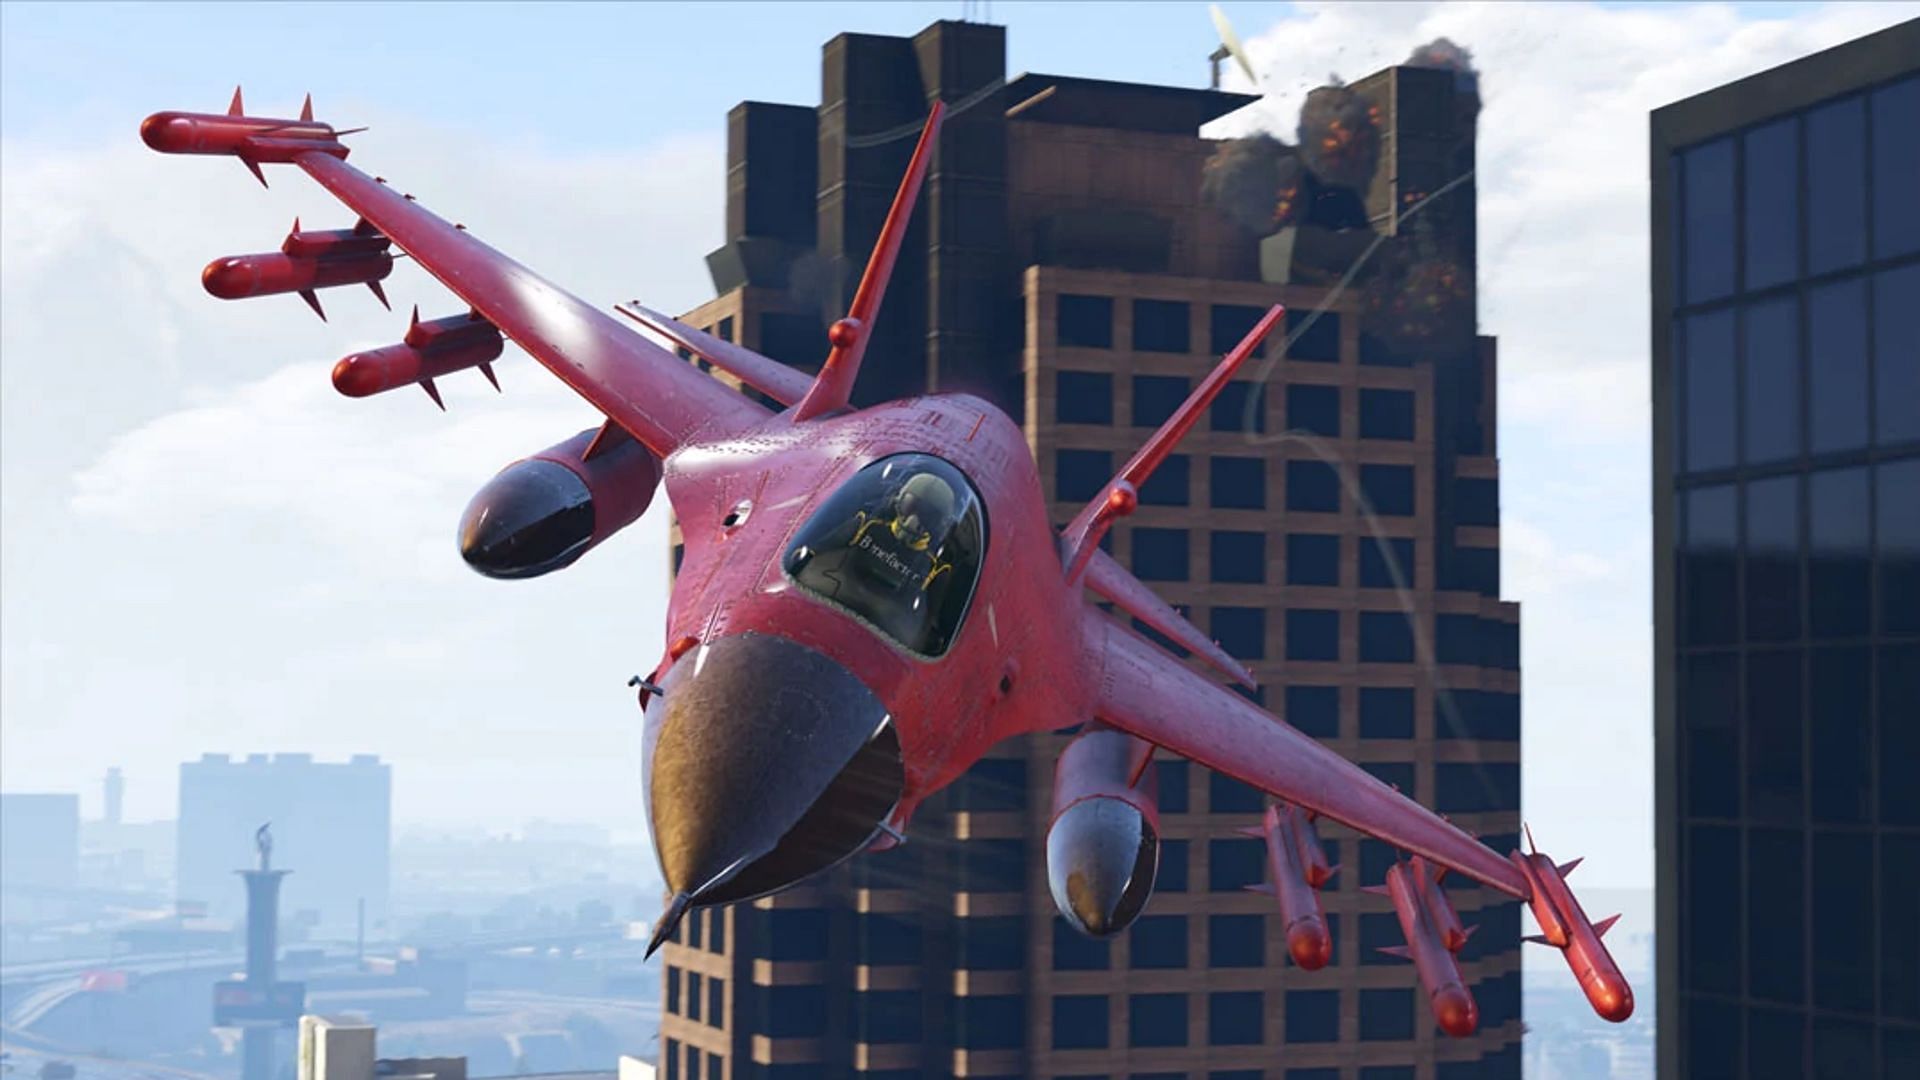 Many GTA Online players should recognize this plane